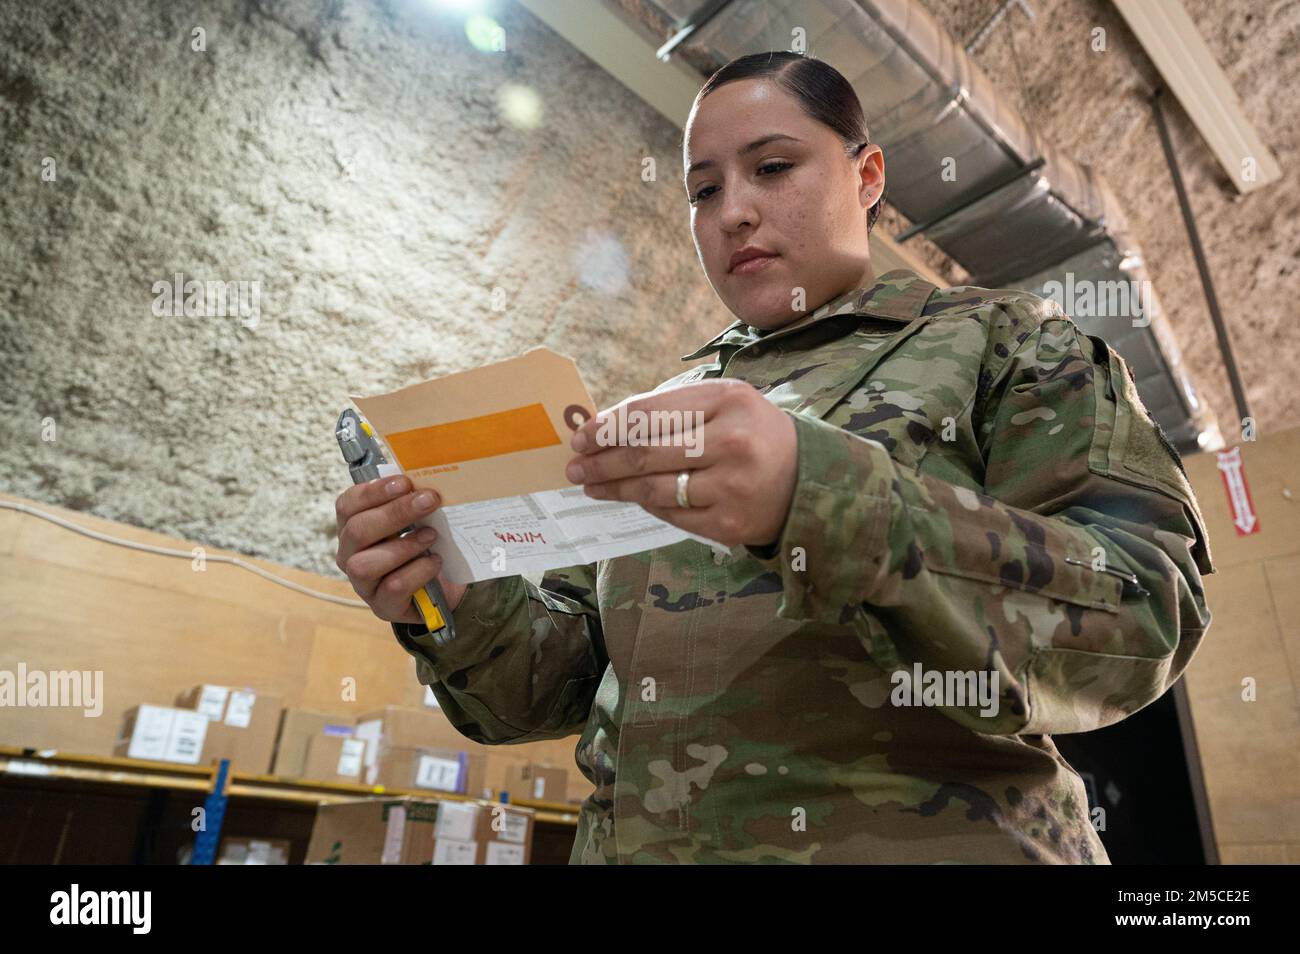 U.S. Air Force Senior Airman Ariana Herrera, inbound cargo technician, 386th Expeditionary Logistics Readiness Squadron, verifies items in a box with the DD Form 1348 documentation at the Traffic Management Operations warehouse at Ali Al Salem Air Base, Kuwait, March 1, 2022. The TMO office here is responsible for movement of cargo, assets and materials through the defense transportation system throughout the U.S. Central Command area of responsibility. Stock Photo